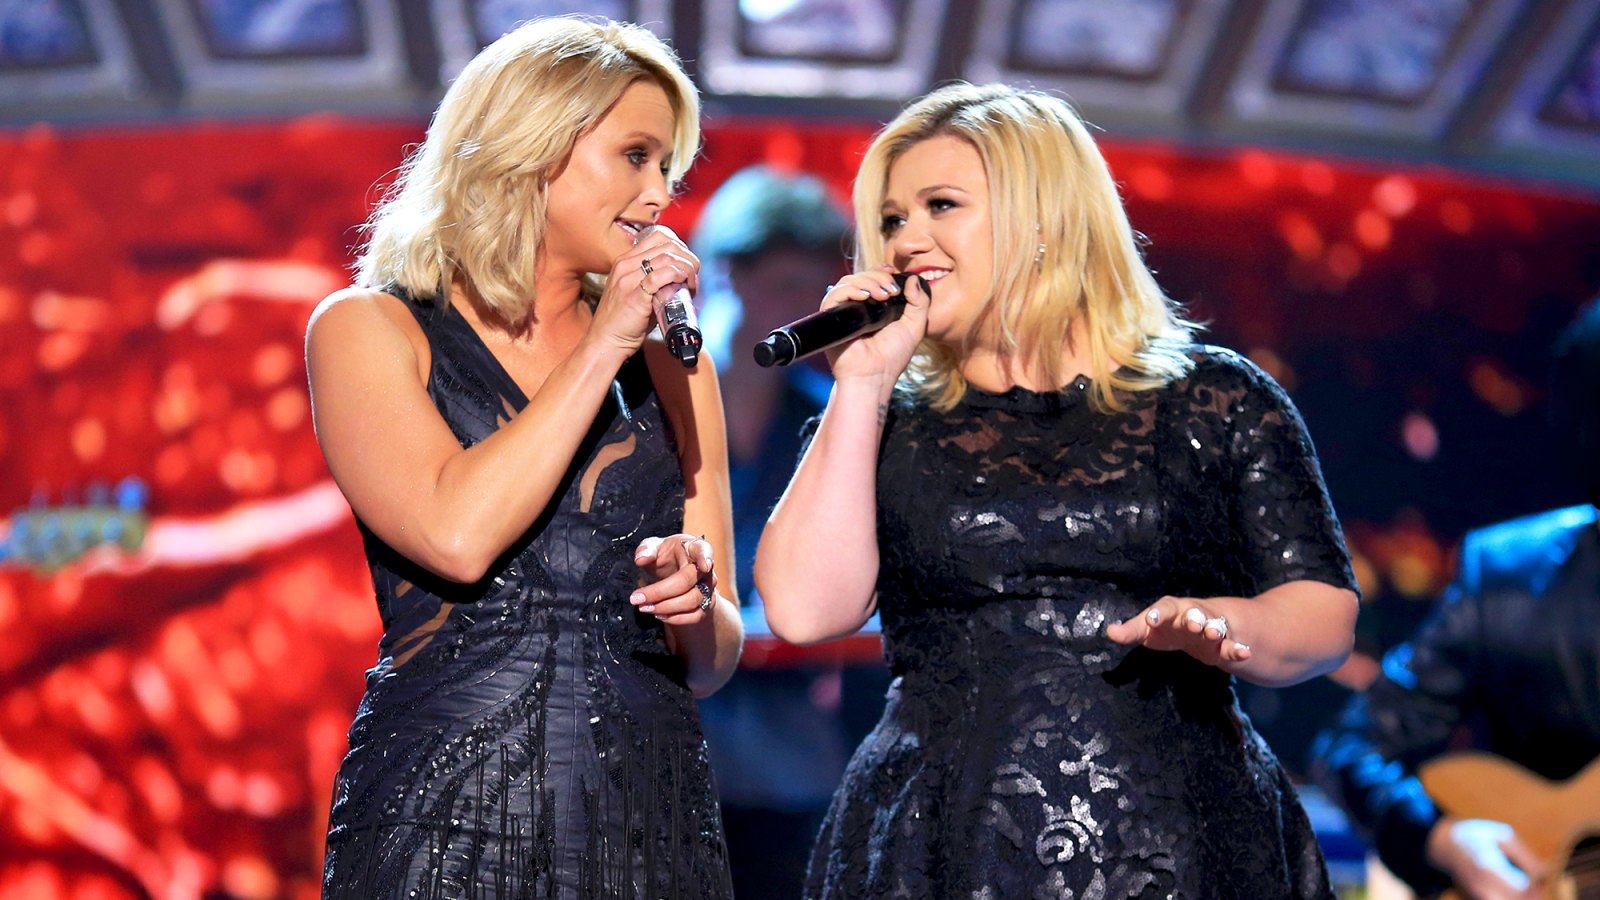 Miranda Lambert and Kelly Clarkson perform onstage during the 2014 American Country Countdown Awards at Music City Center in Nashville, Tennessee.